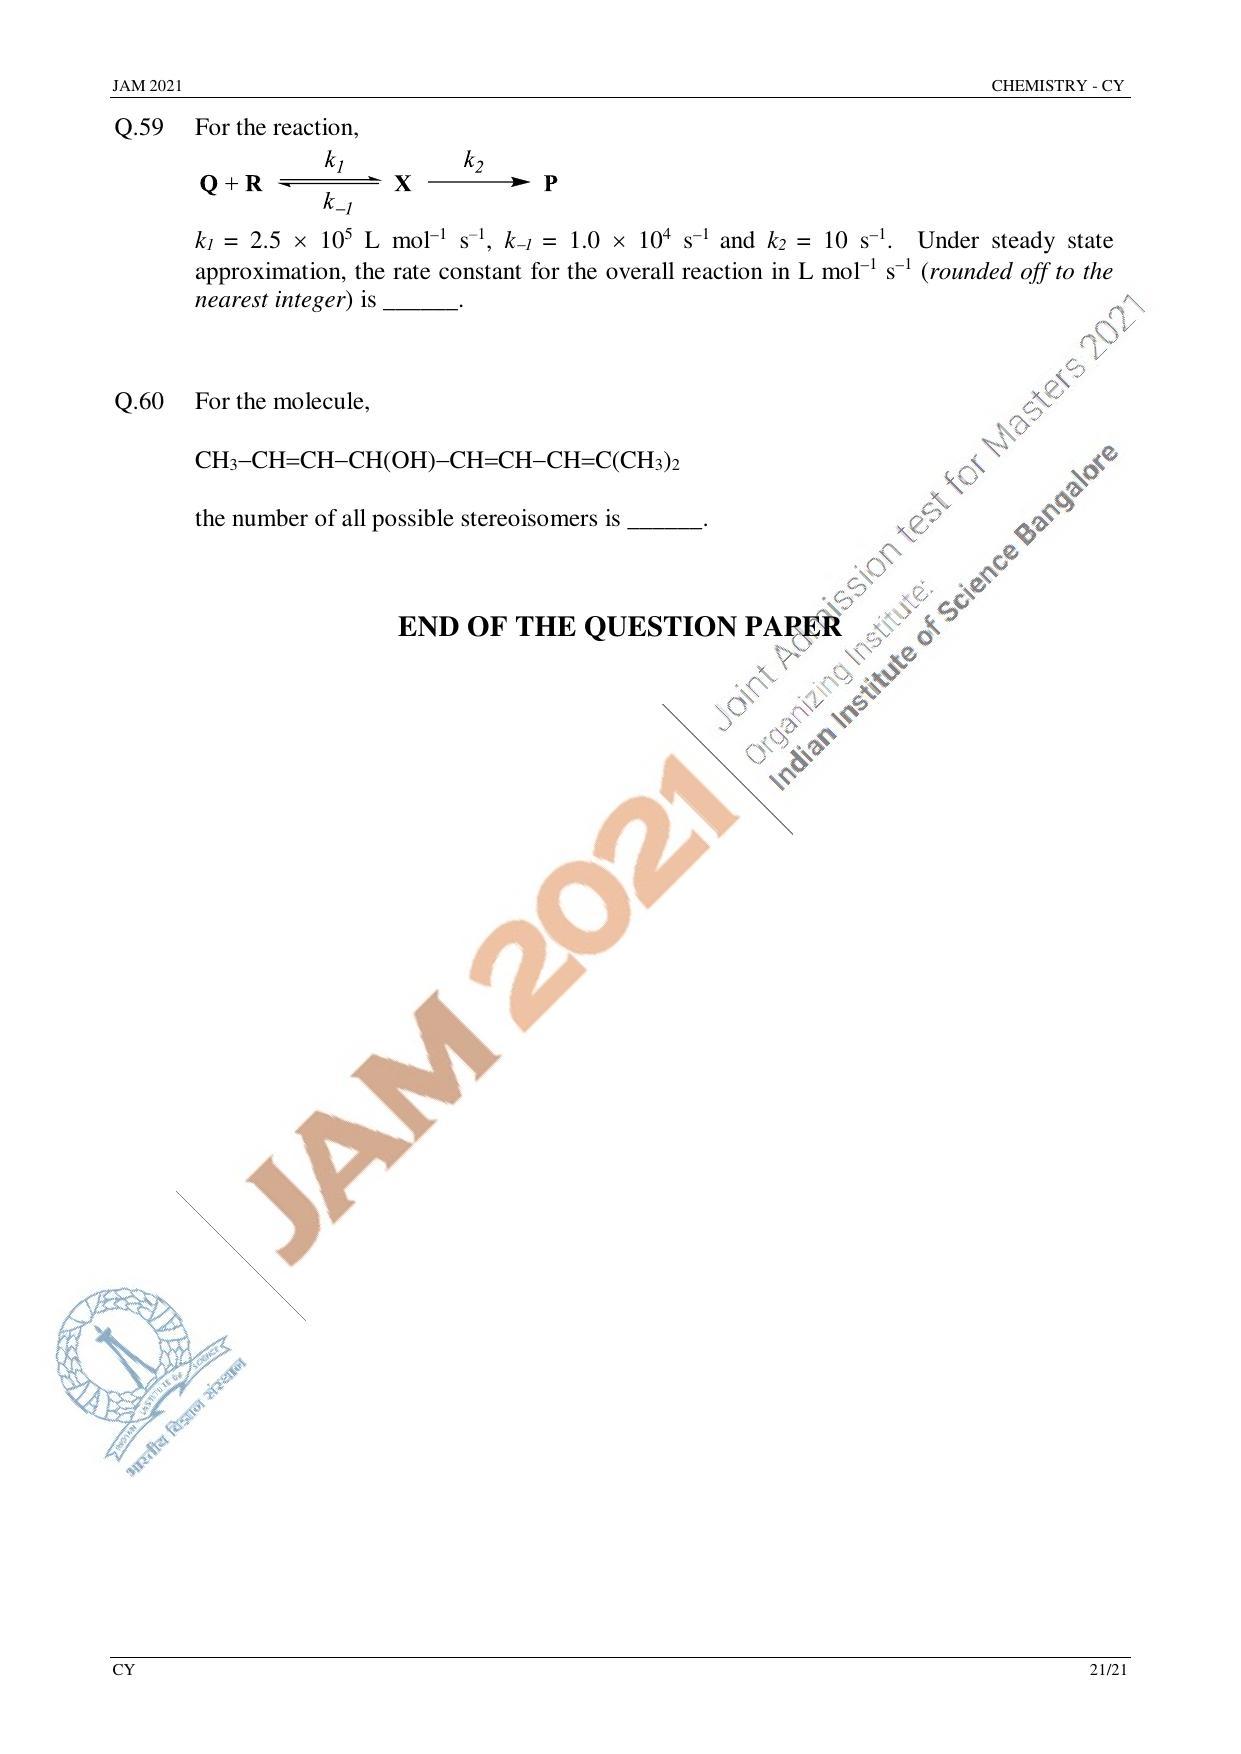 JAM 2021: CY Question Paper - Page 21